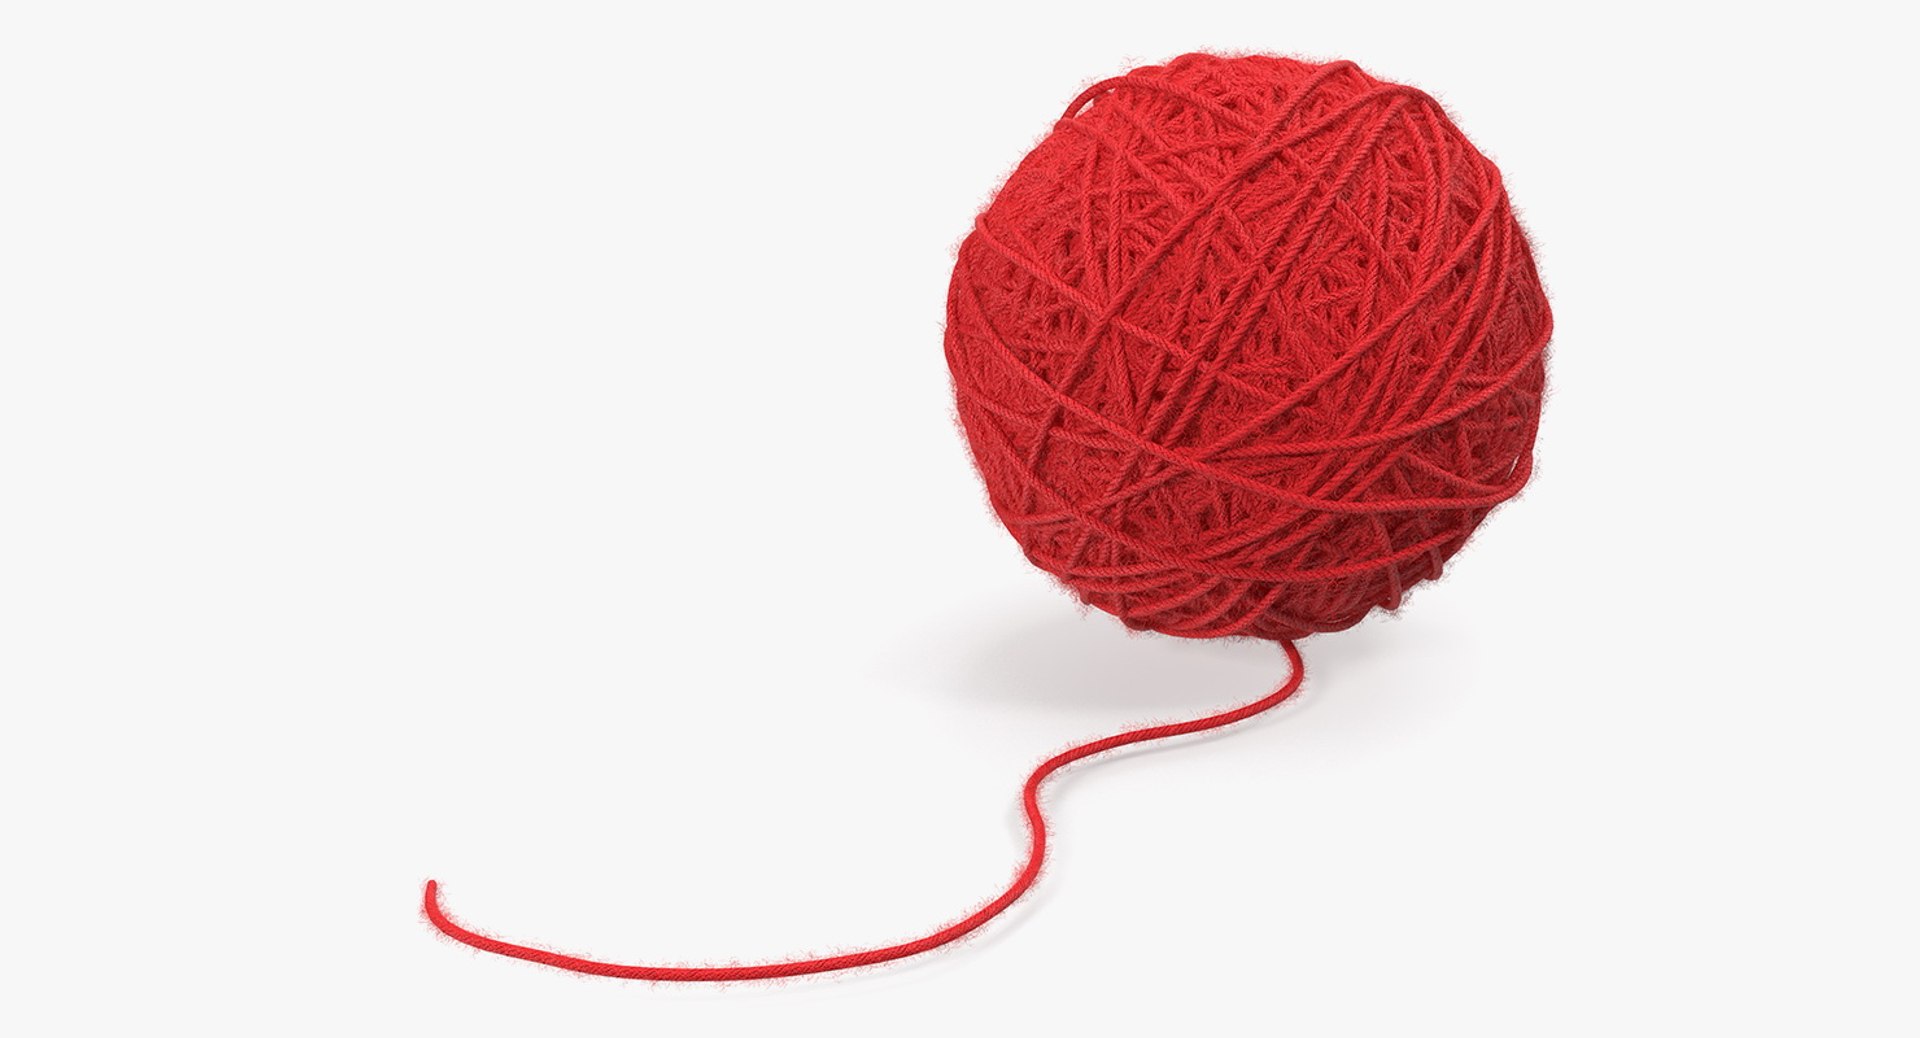 34,773 Red Wool Ball Images, Stock Photos, 3D objects, & Vectors